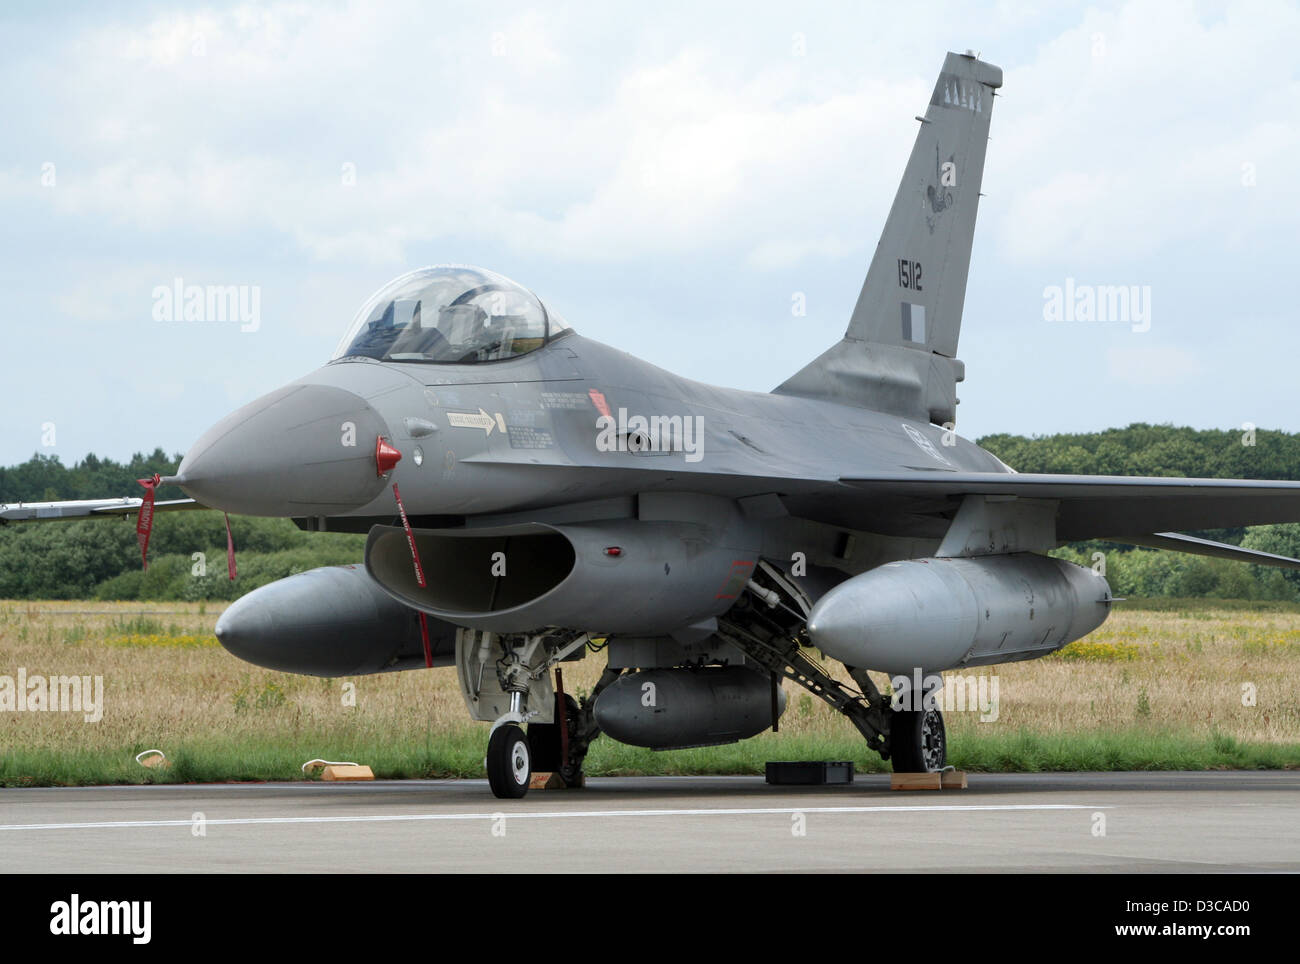 Portuguese Air Force F-16 fighter jet Stock Photo - Alamy